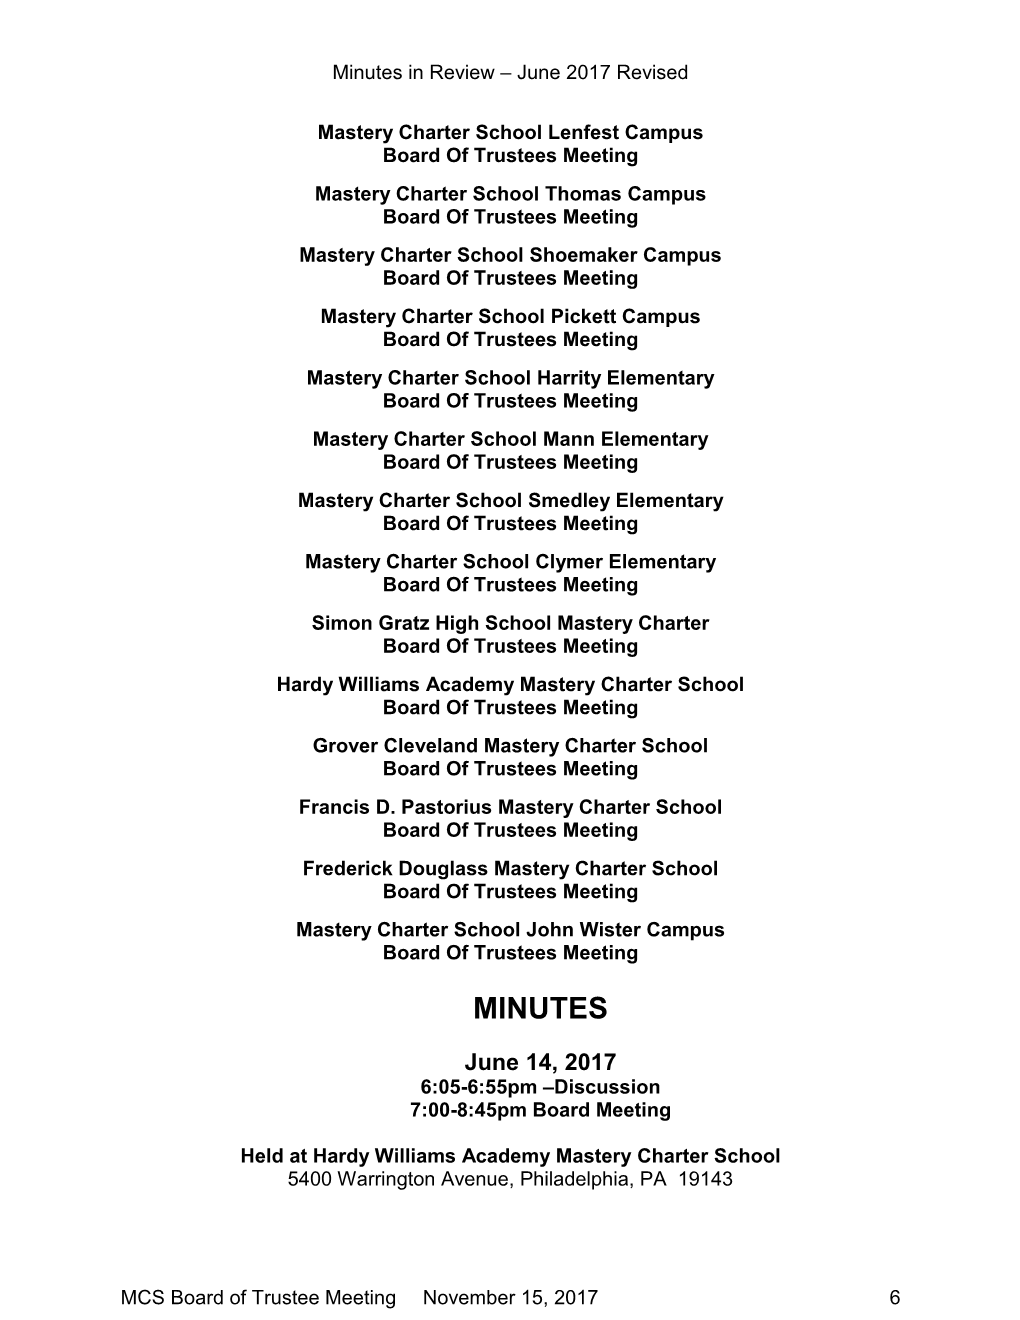 Mastery Charter Schools PA Board Minutes 2017.06.14